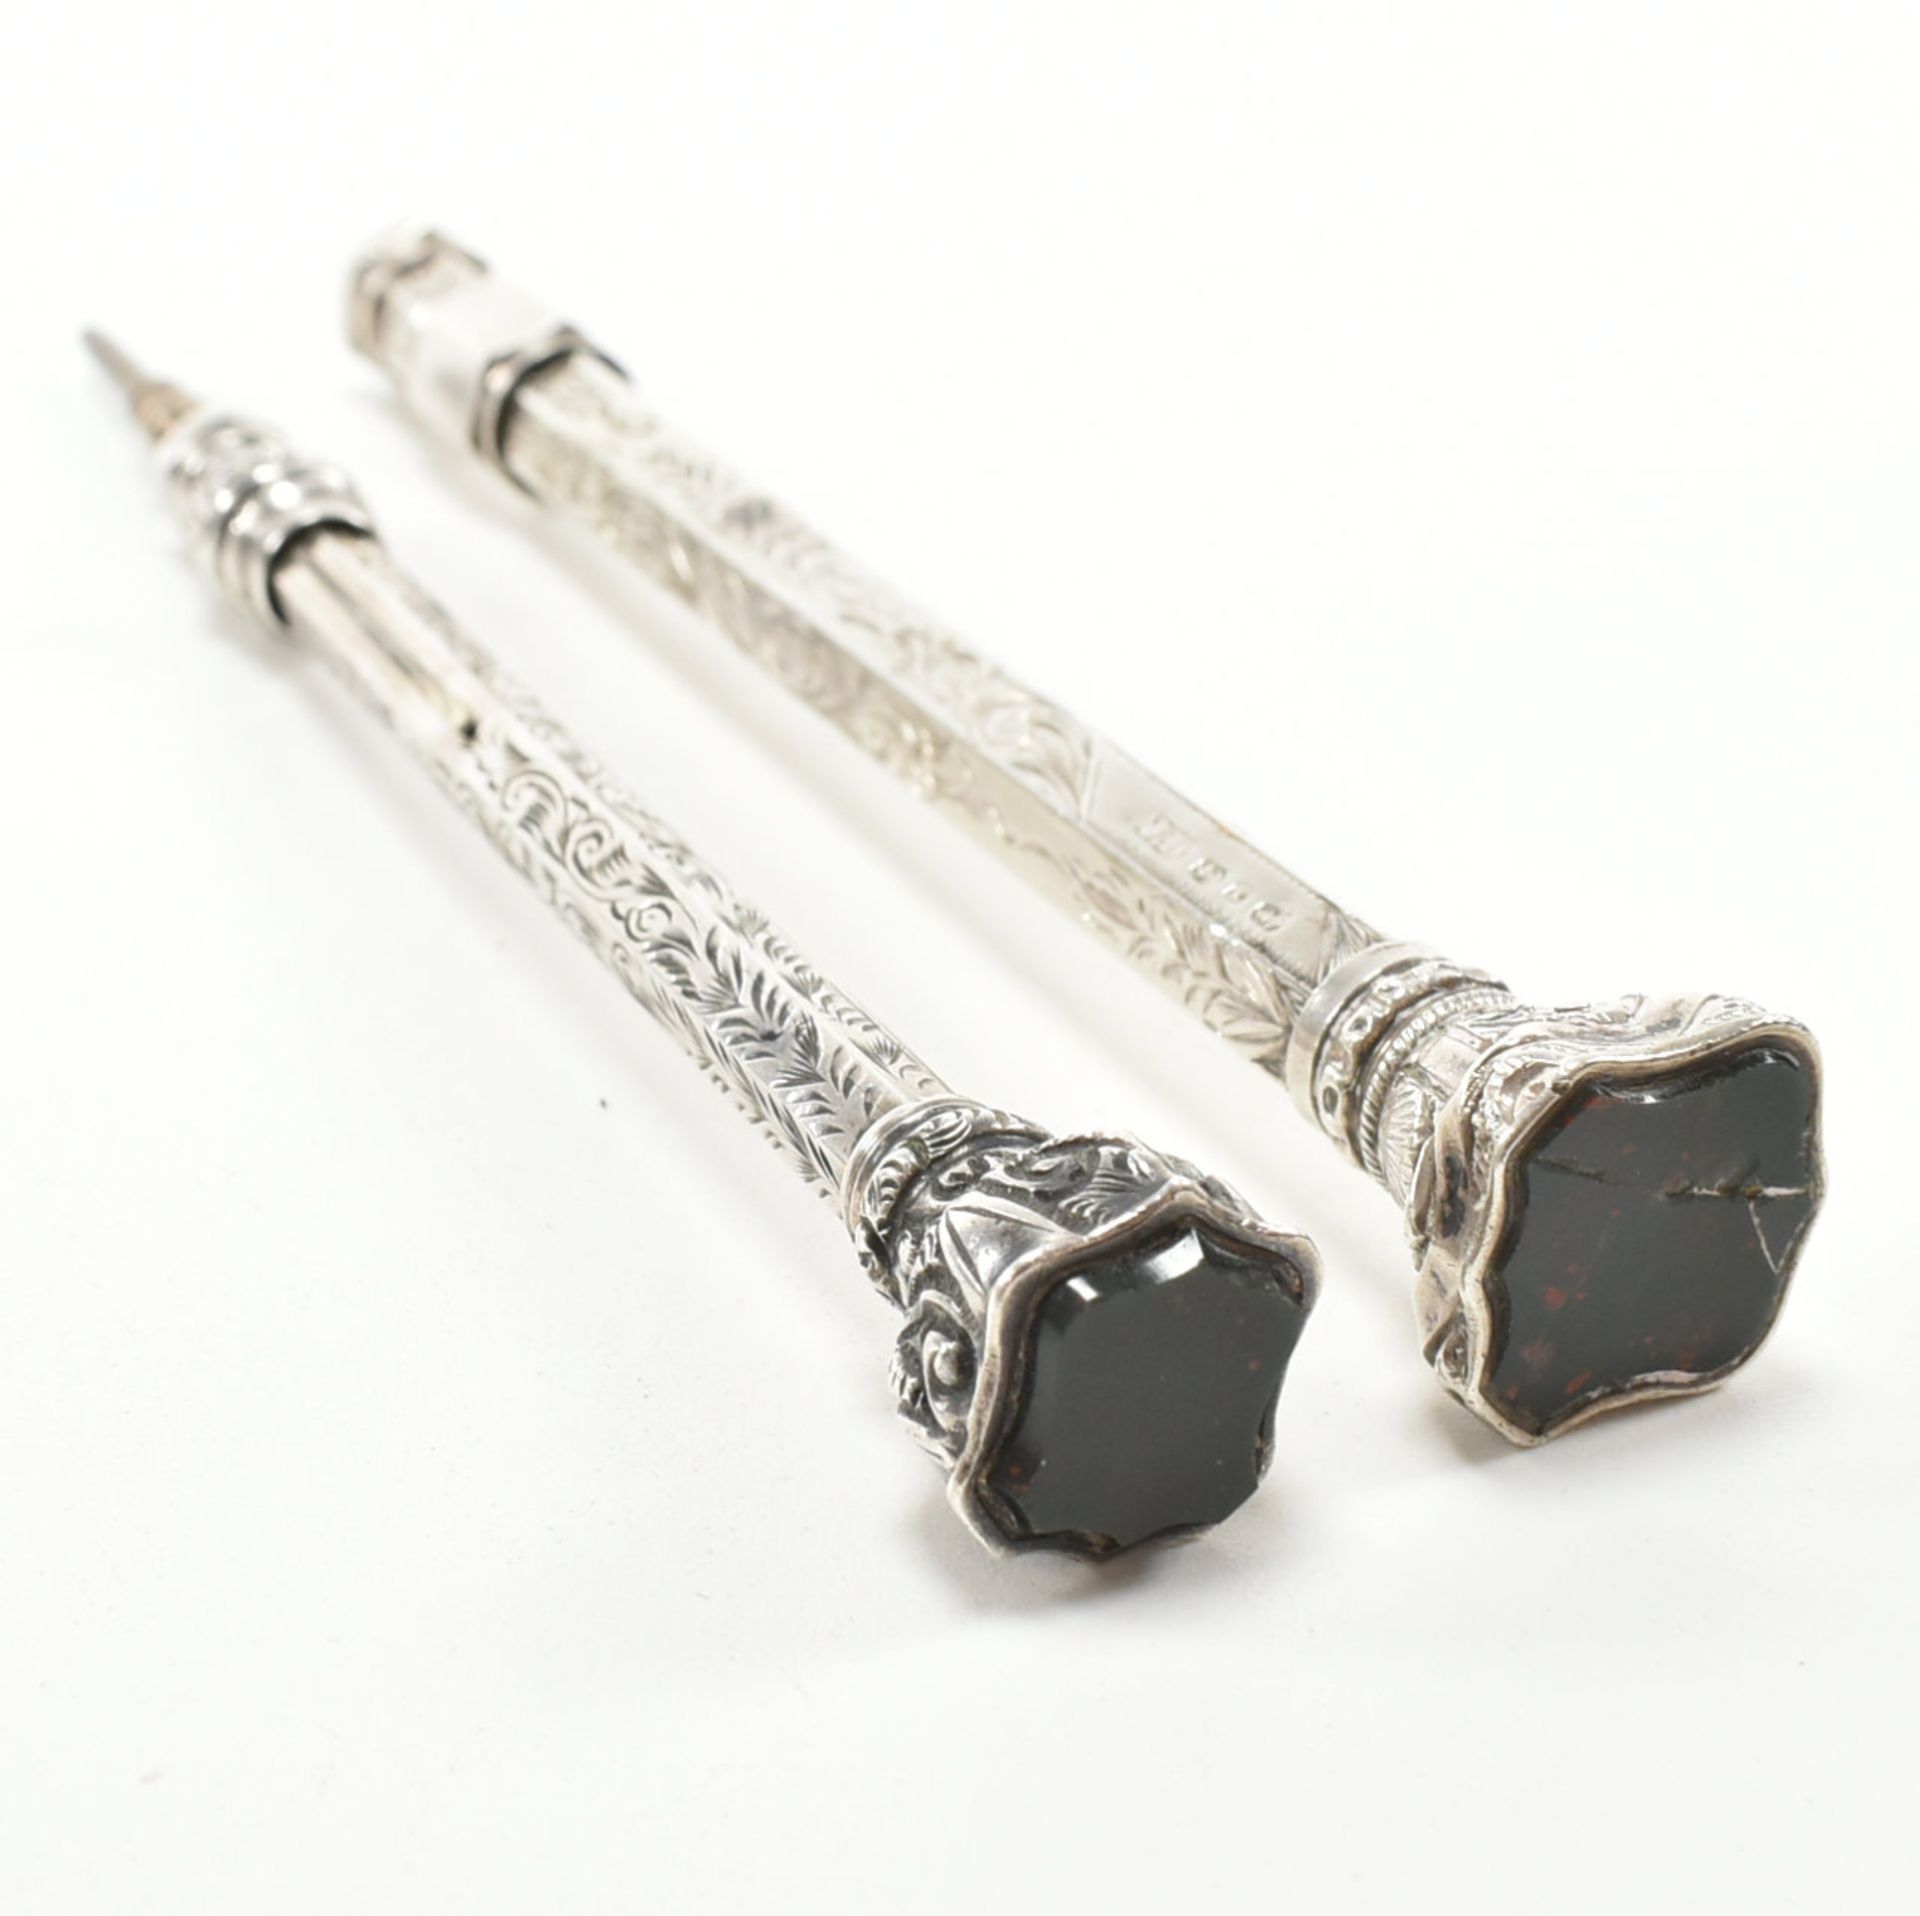 TWO SILVER PROPELLING PENCILS WITH BLOODSTONE SEALS - Image 4 of 10